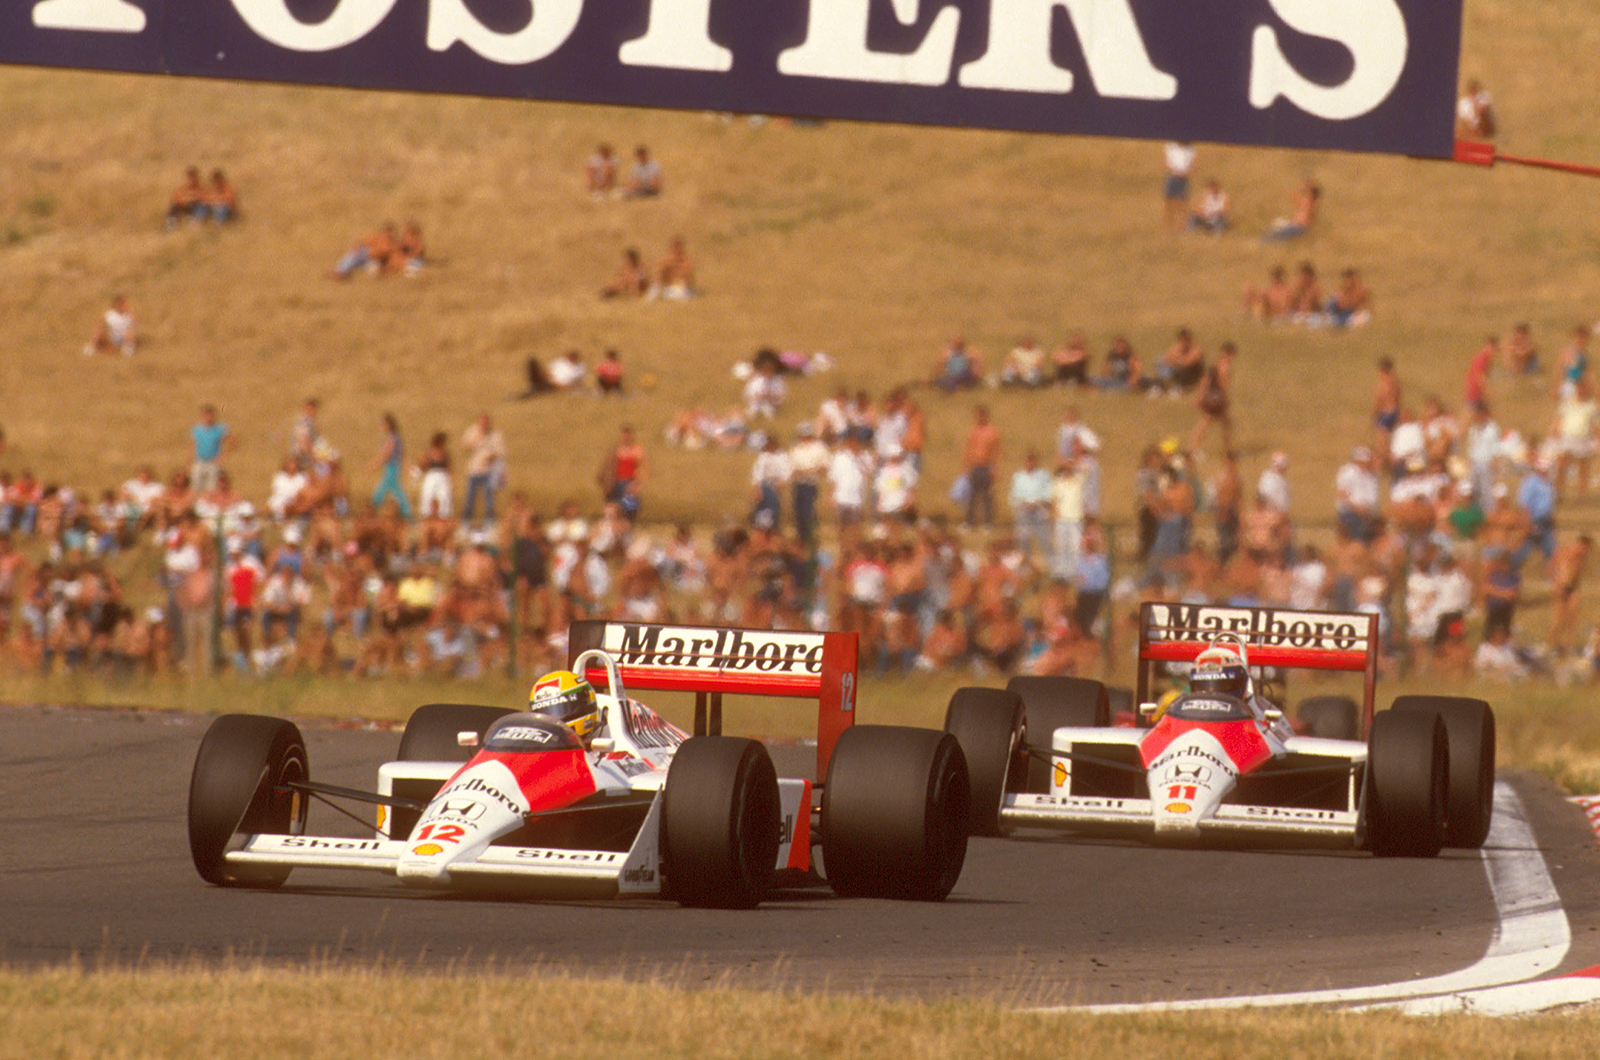 Being late to the party didn’t hurt McLaren in 1988 – here, Senna and Prost score a 1-2 at the Hungaroring